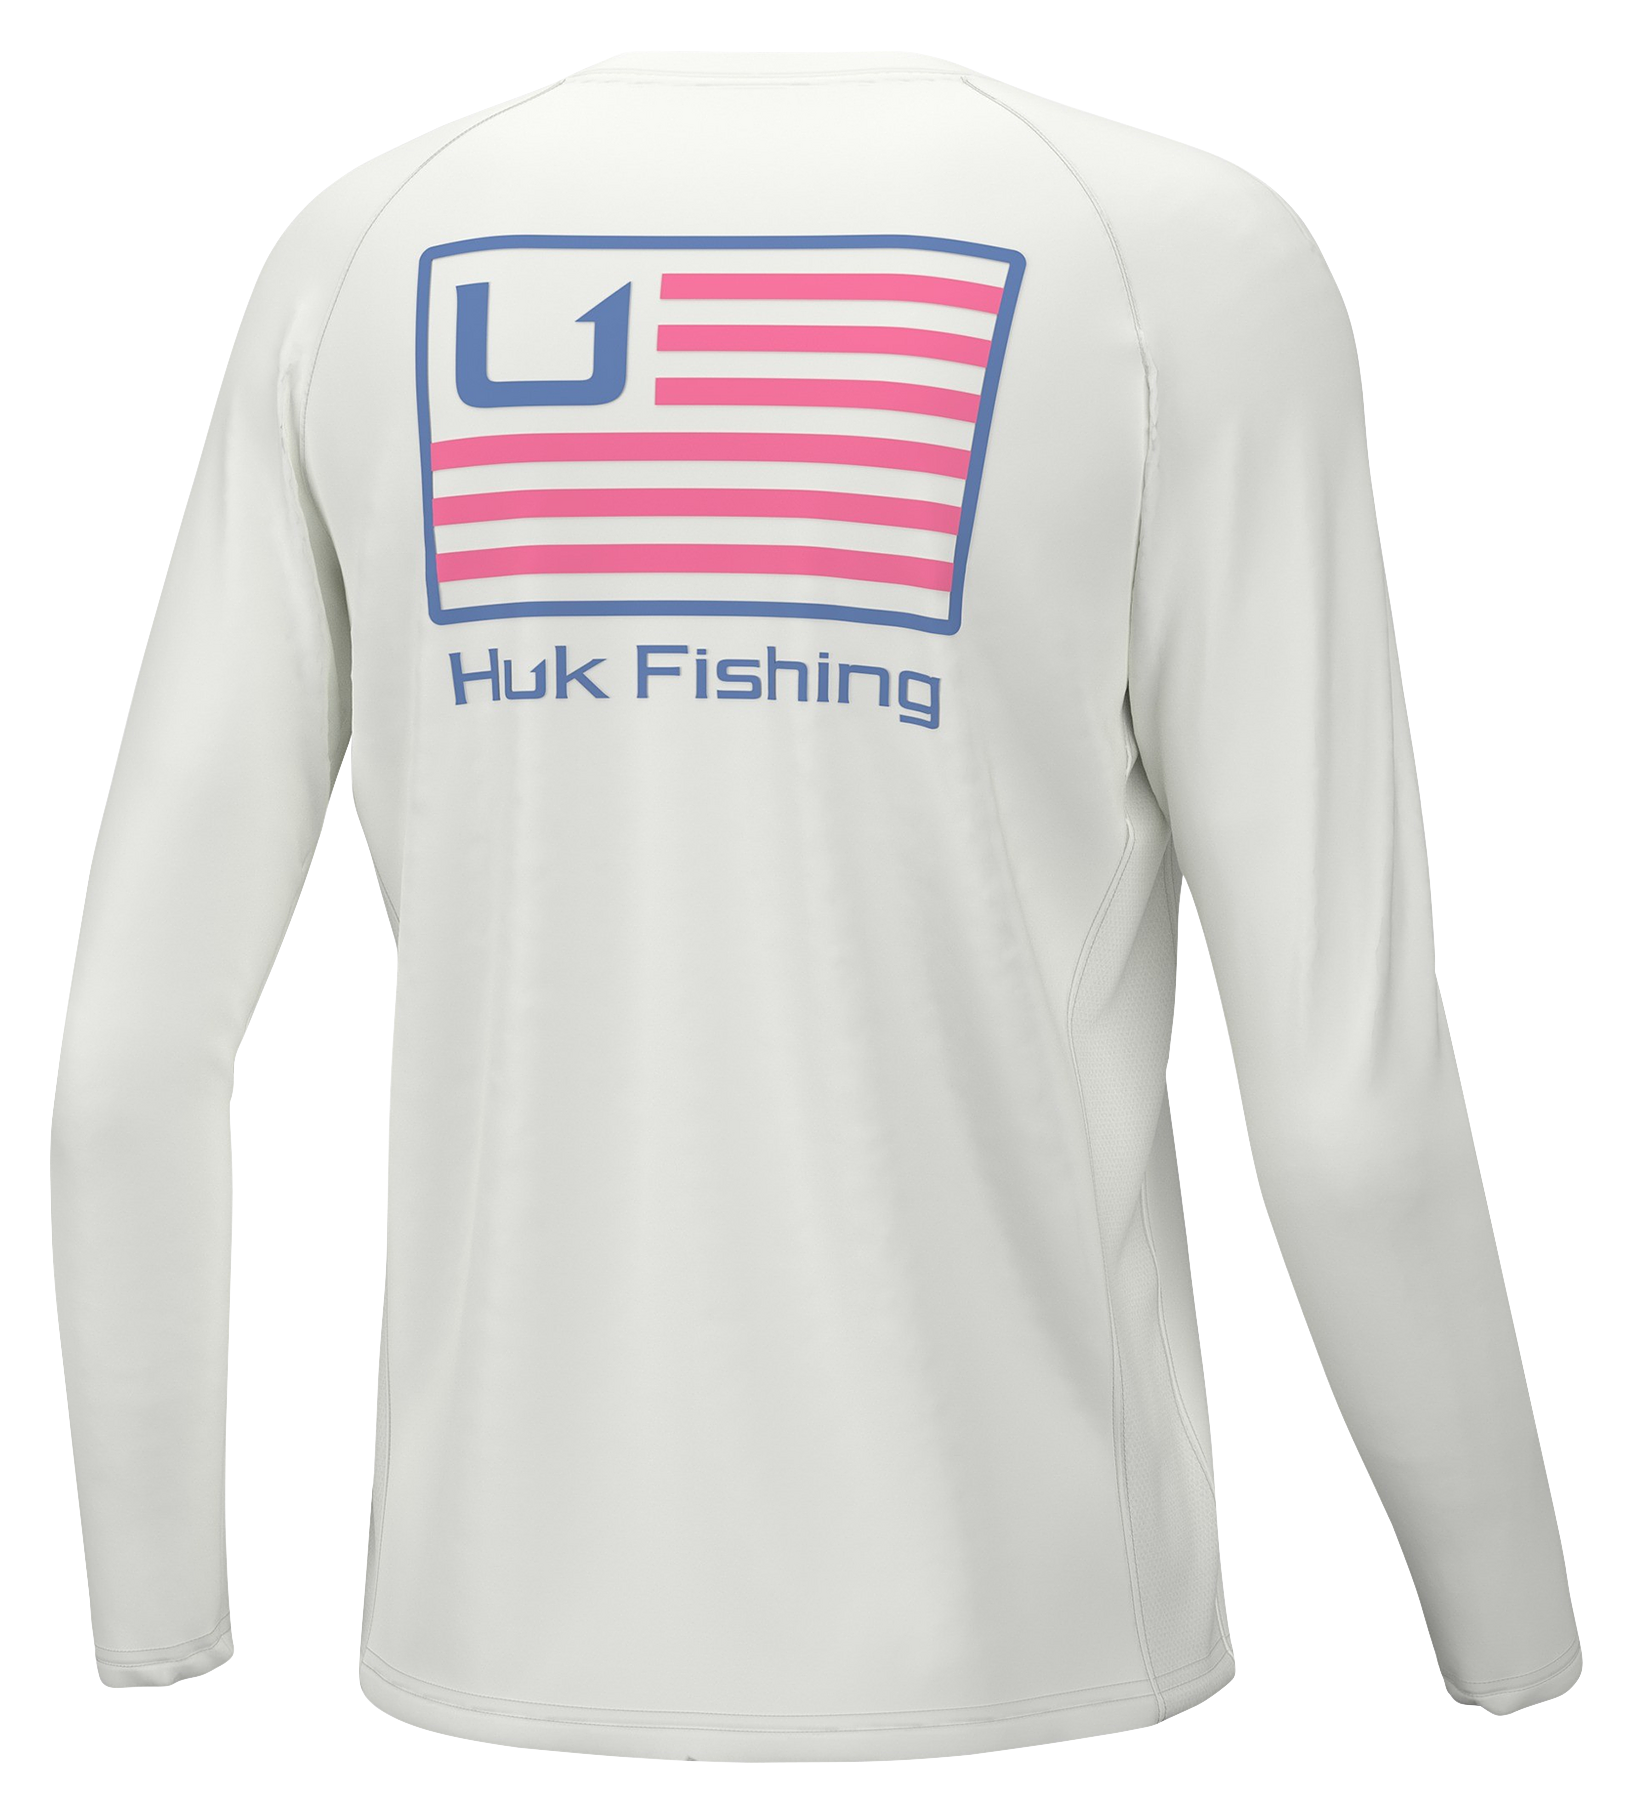 Huk Pursuit Huk and Bars Long-Sleeve T-Shirt for Kids